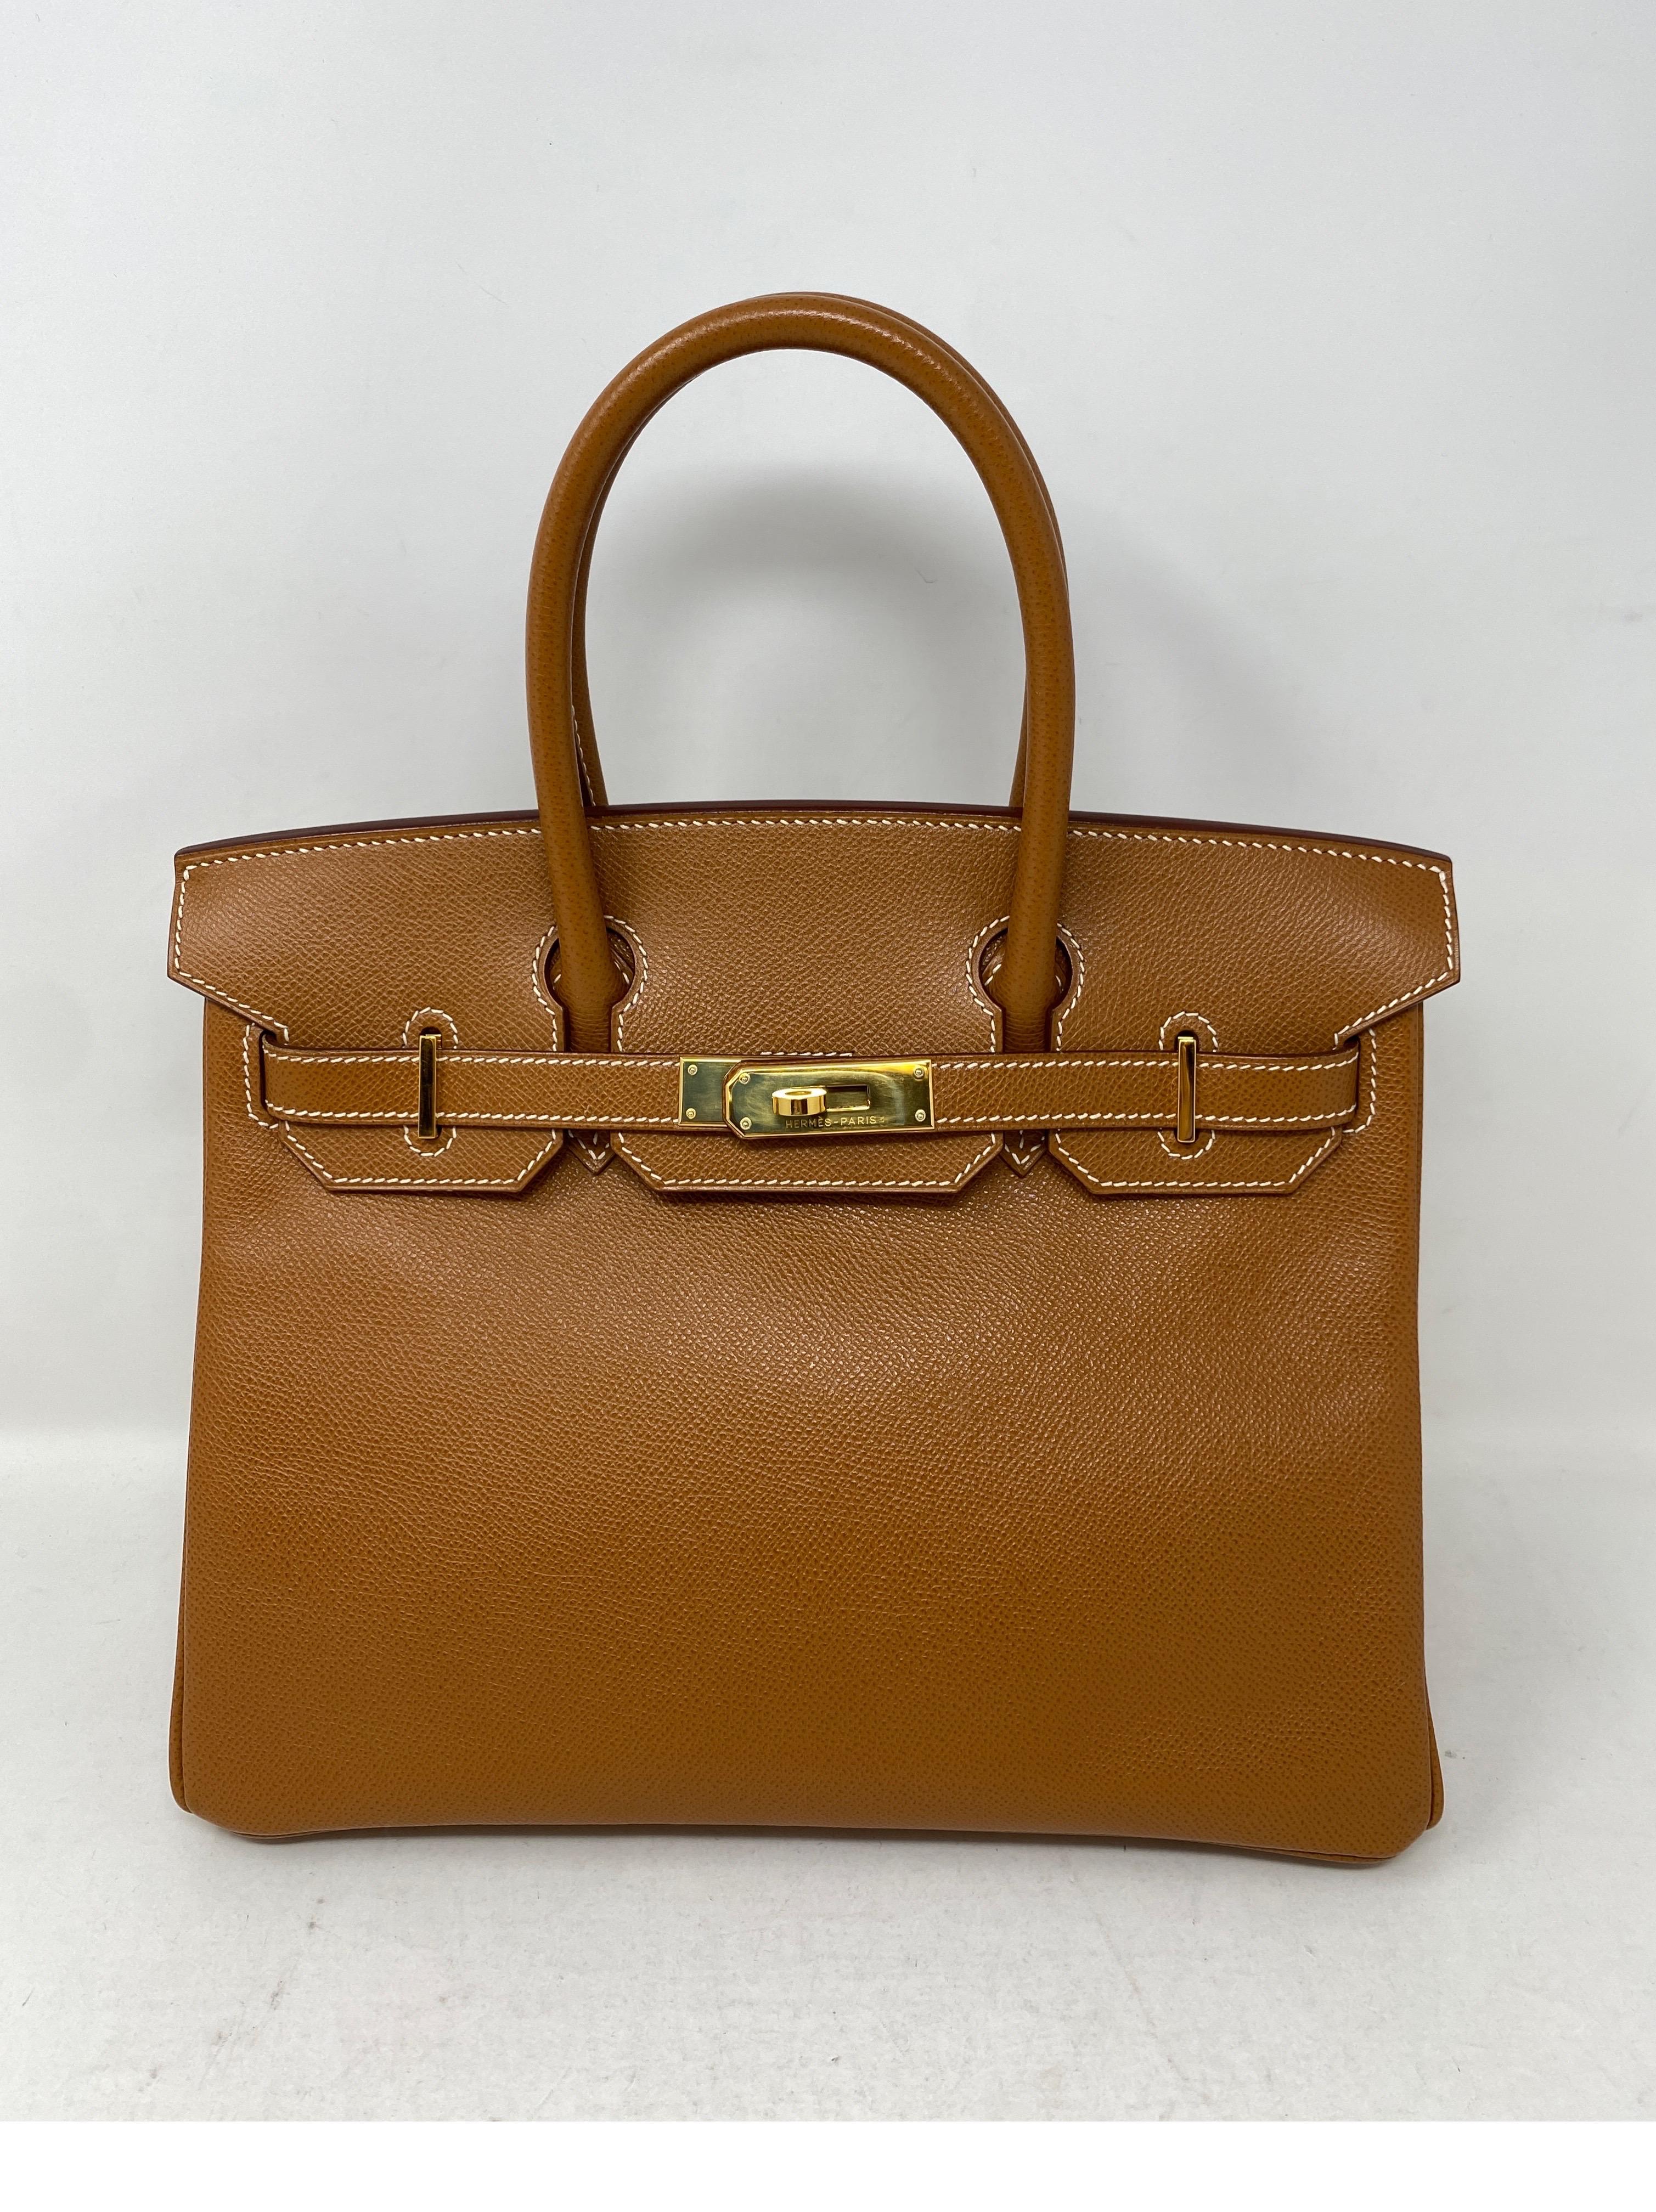 Hermes Gold Birkin 30 Bag. Gold hardware. Hard to find gold on gold combination. Epsom leather. Stunning bag. Amazing structure. Small white spot inside interior. Exterior look like new. Includes clochette, lock, keys, and dust cover. Guaranteed